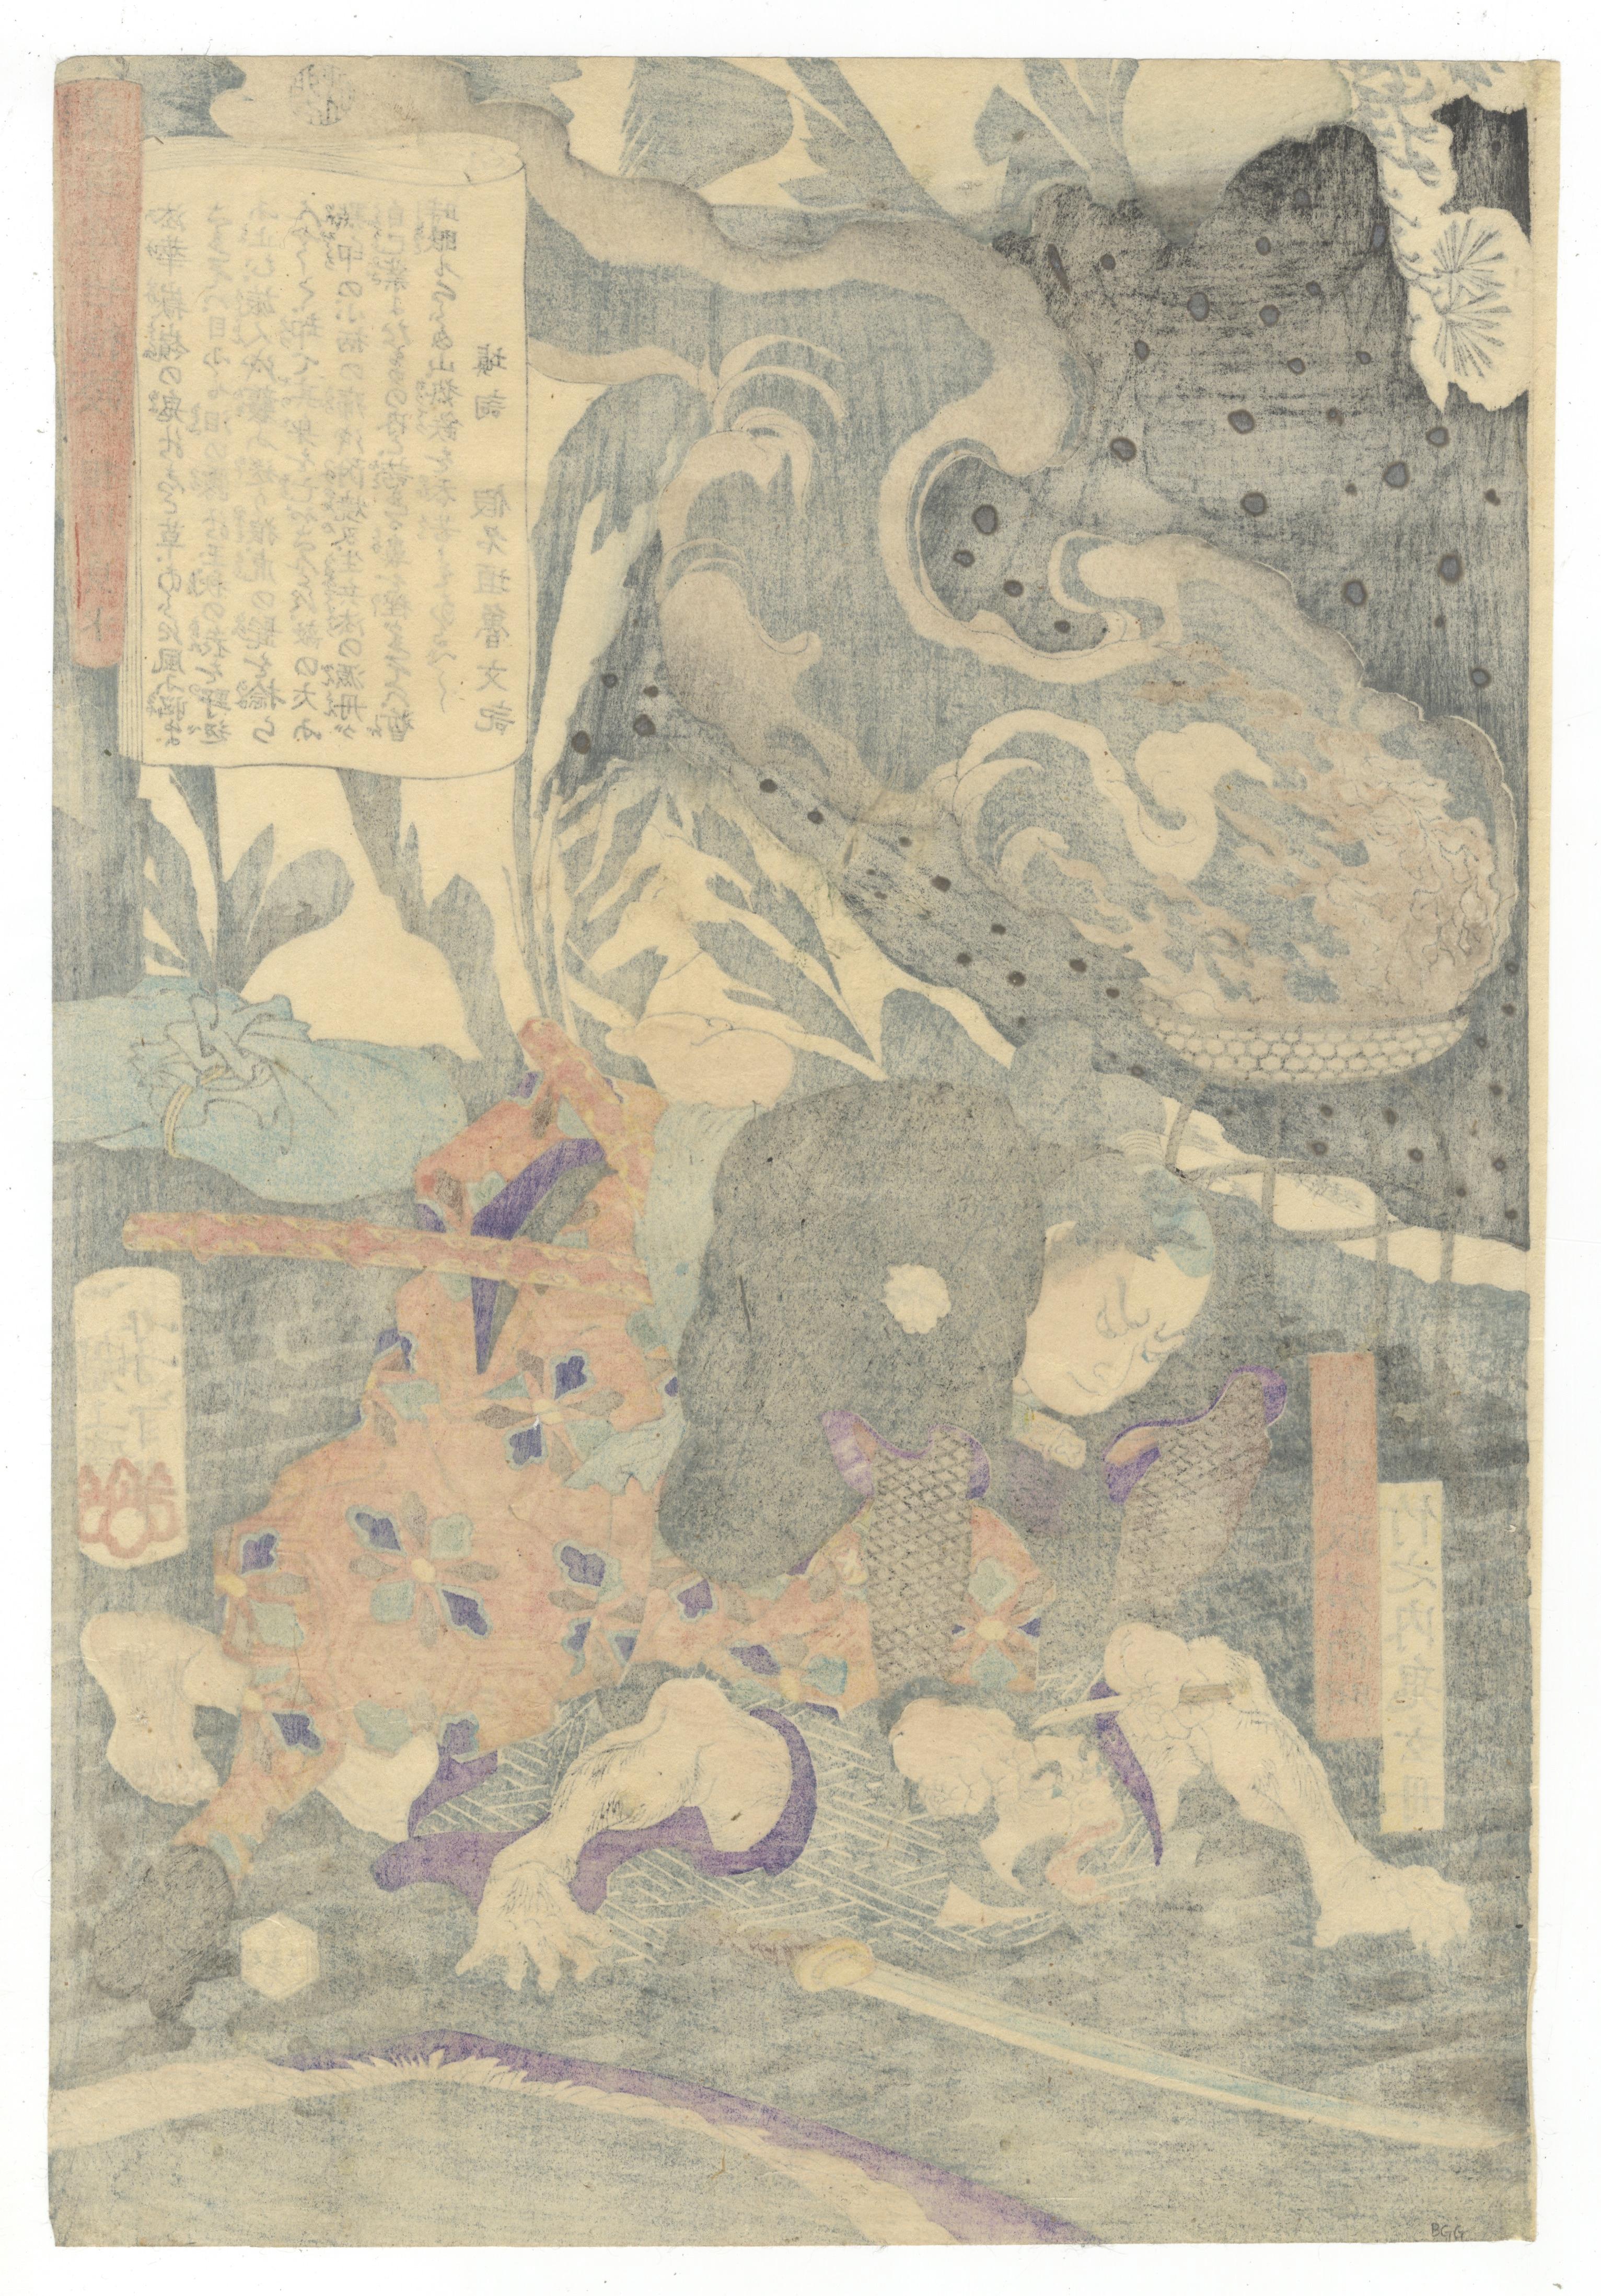 Artist: Yoshitoshi Tsukioka (1839-1892)
Title: Aikawa Teusui
Series: Brocade Pictures of the East: Stories of the Floating World
Publisher: Masudaya Ginjiro
Date: 1867-1868
Dimensions: 24.1 x 35.3 cm
Condition: Restored holes. Slightly